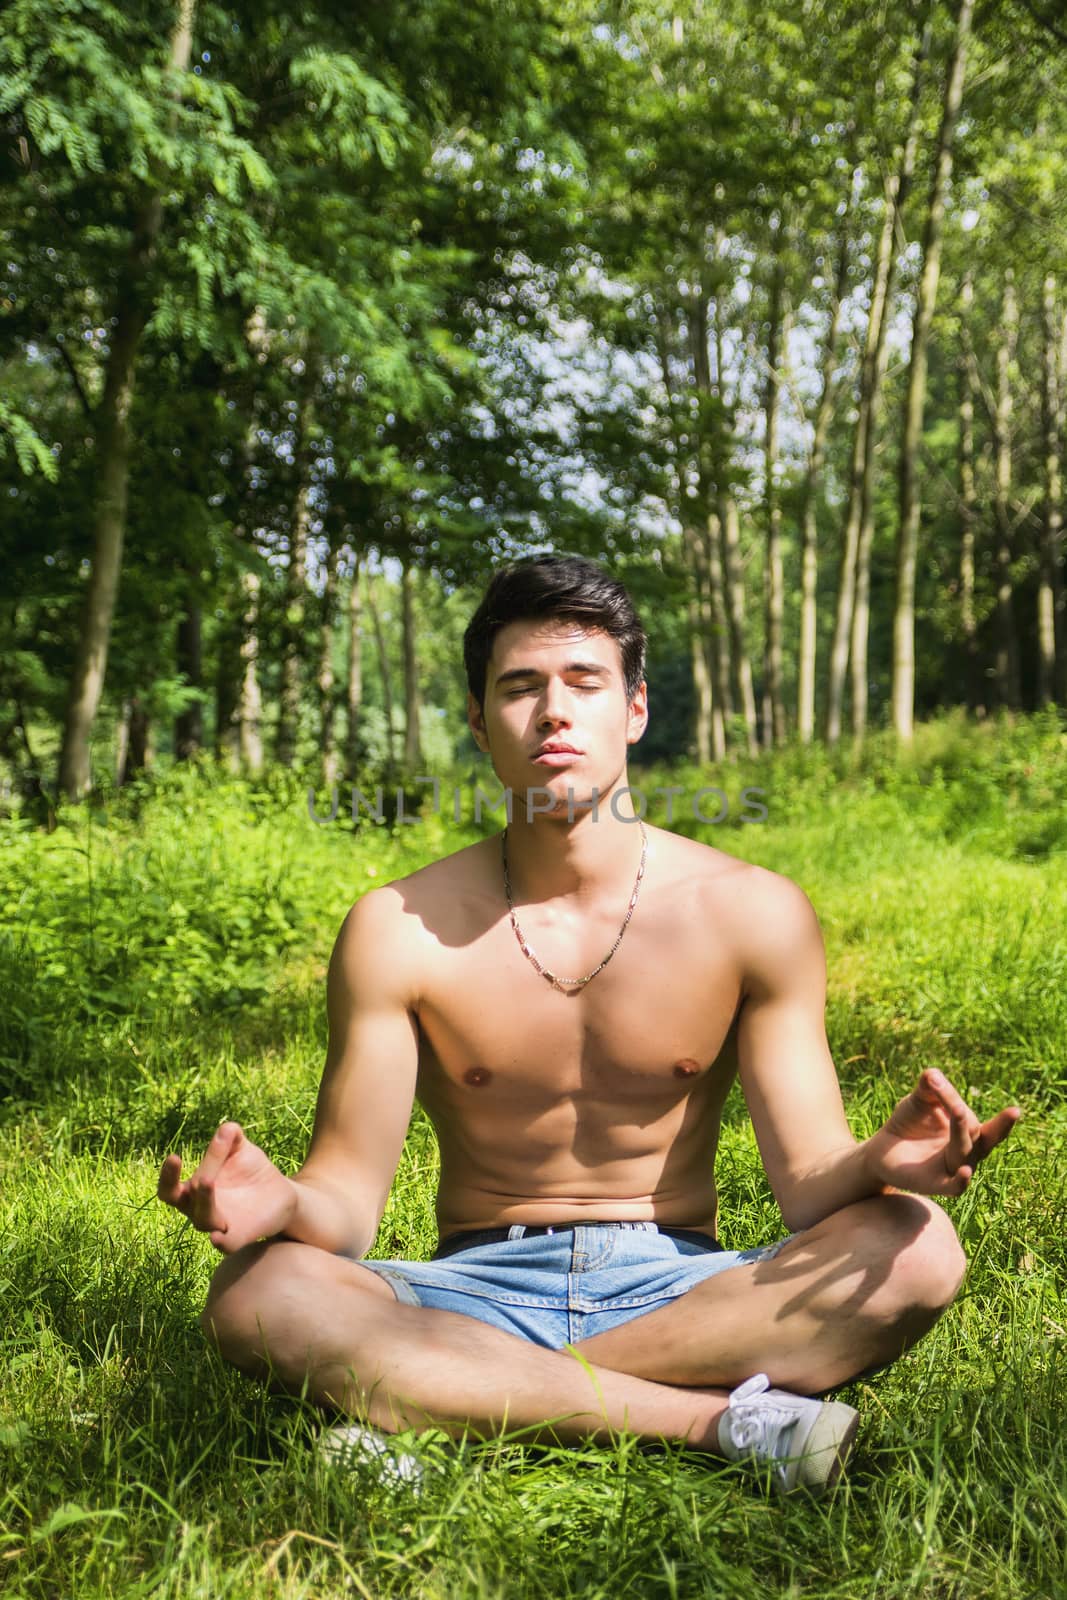 Handsome Shirtless Young Man During Meditation or Doing an Outdoor Yoga Exercise Sitting Cross Legged on Grassy Ground Alone in Woods